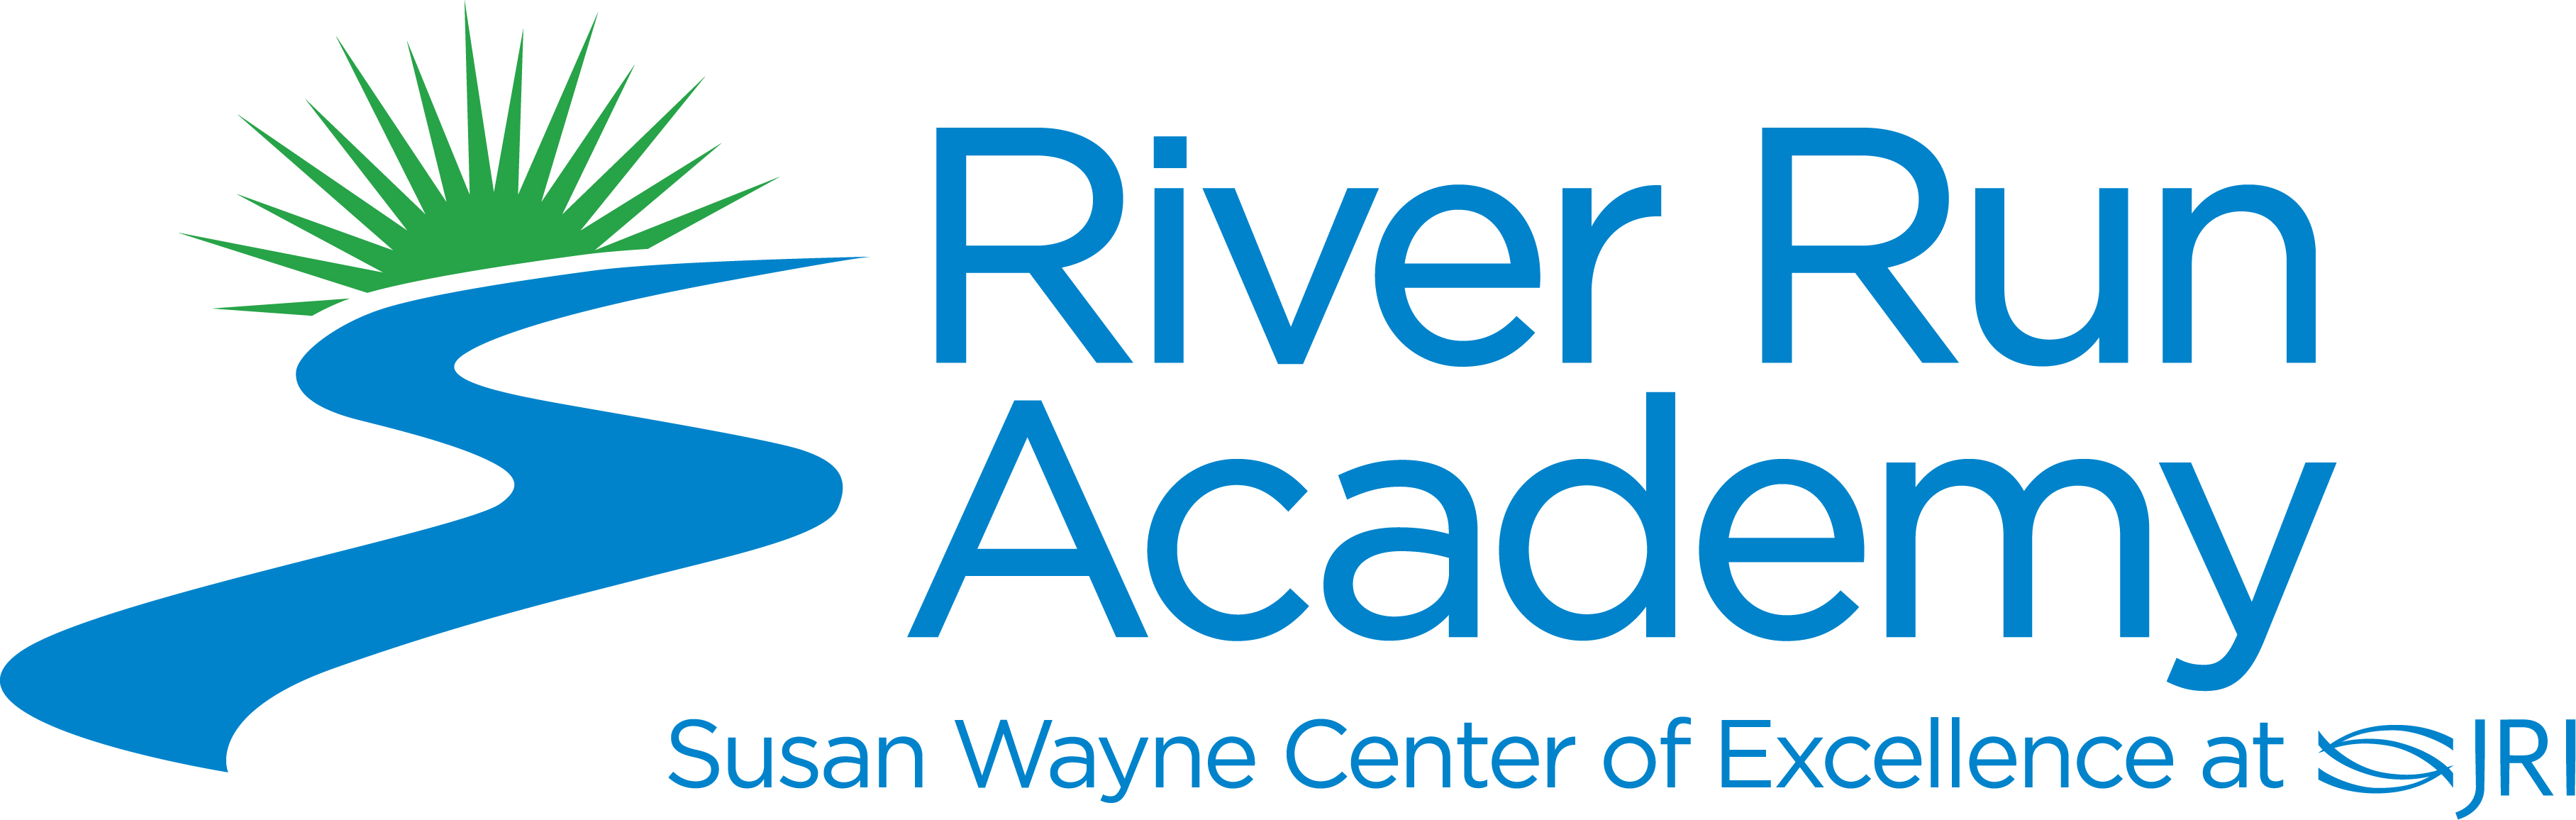 River Run Academy at the Susan Wayne Center of Excellence | Justice ...